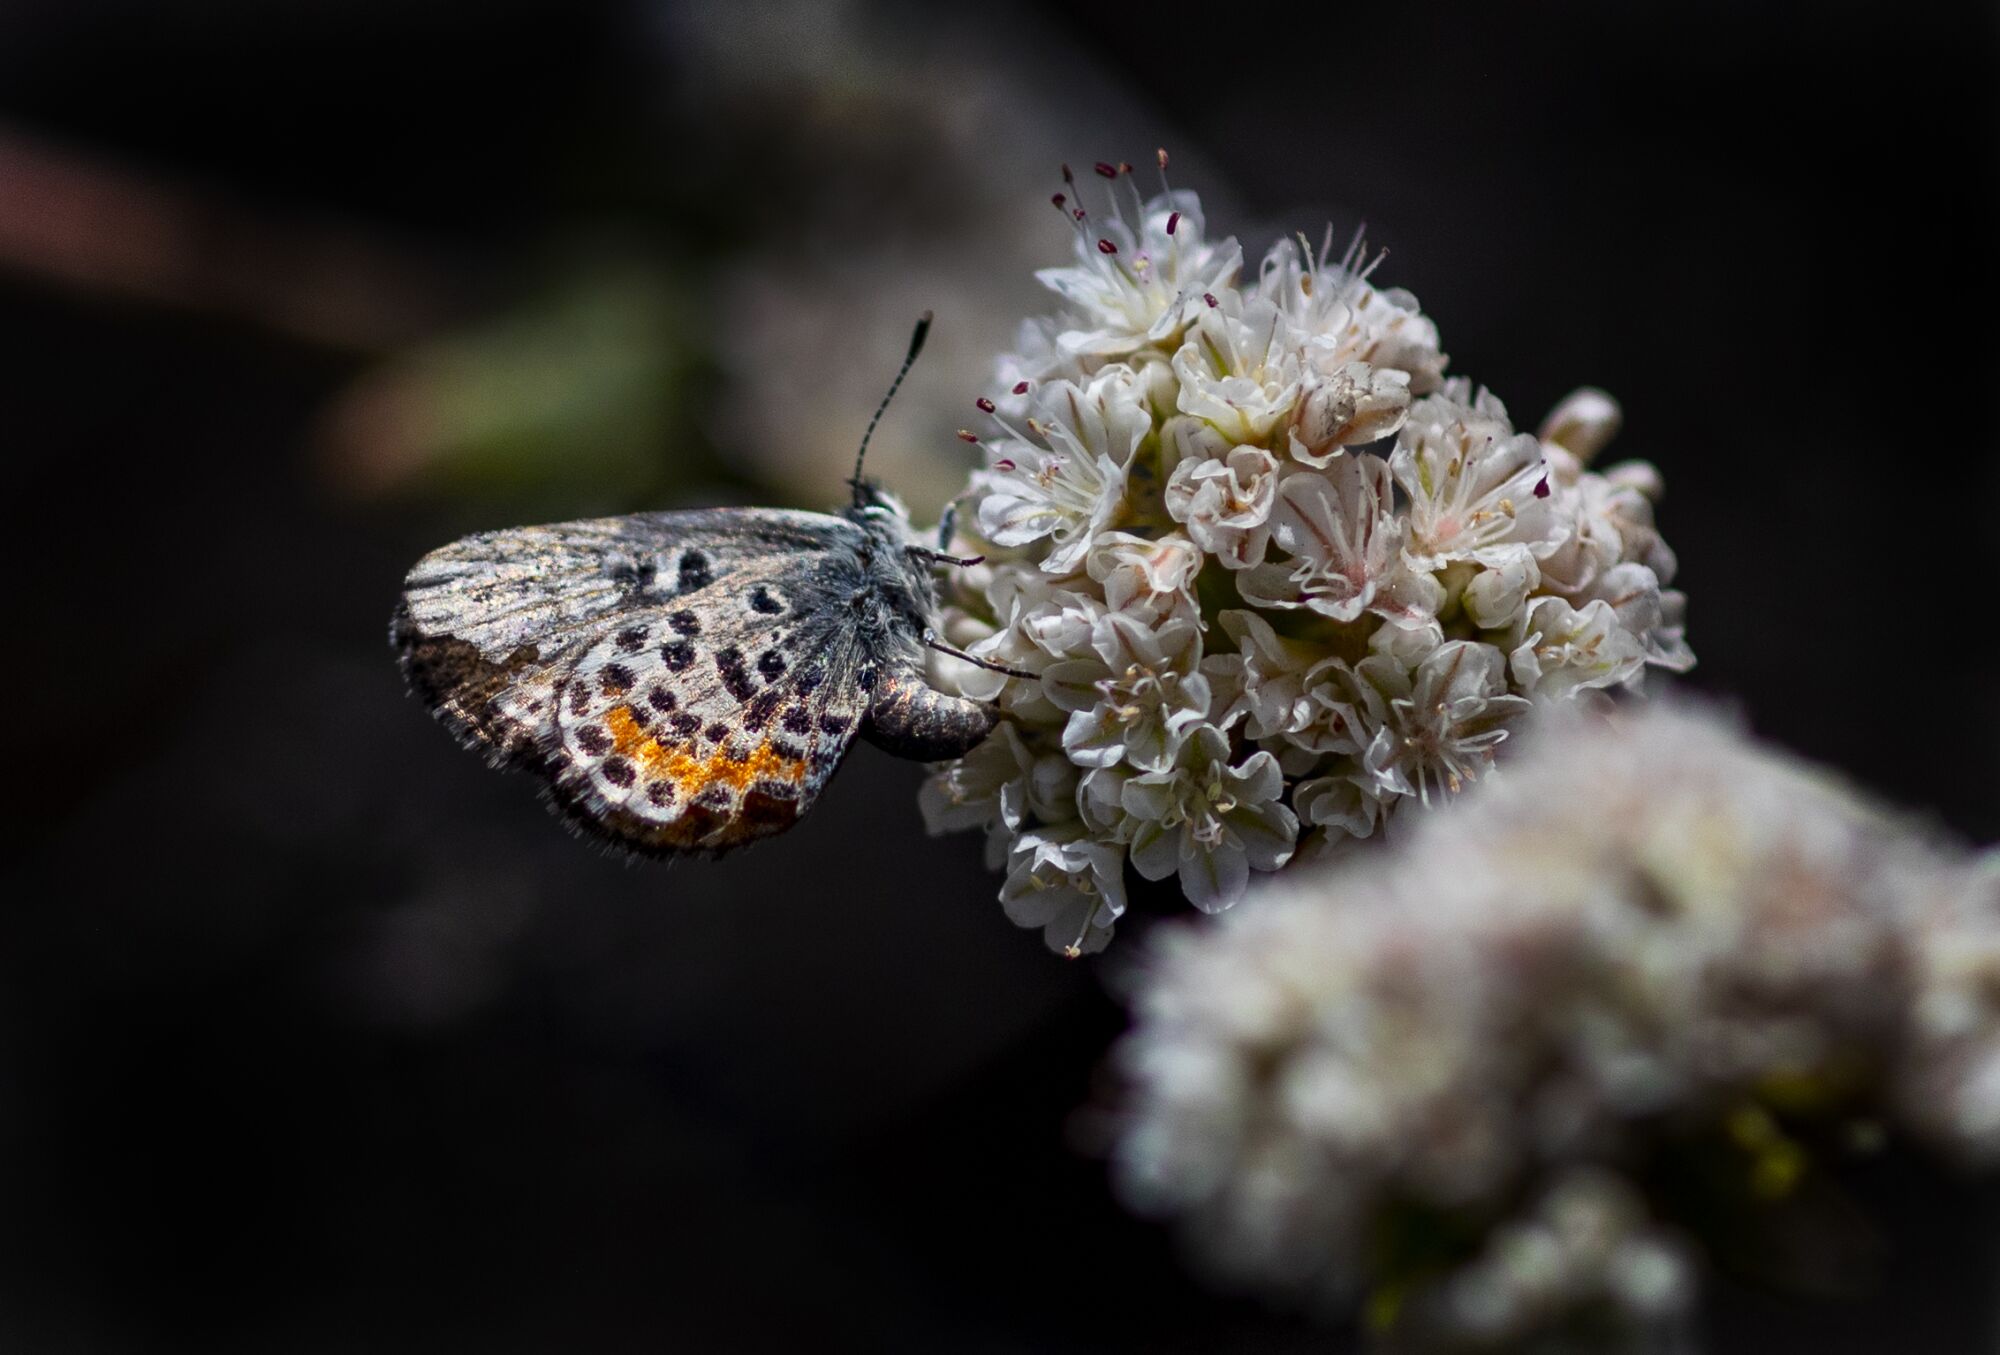 An El Segundo blue butterfly on a cluster of white flowers.